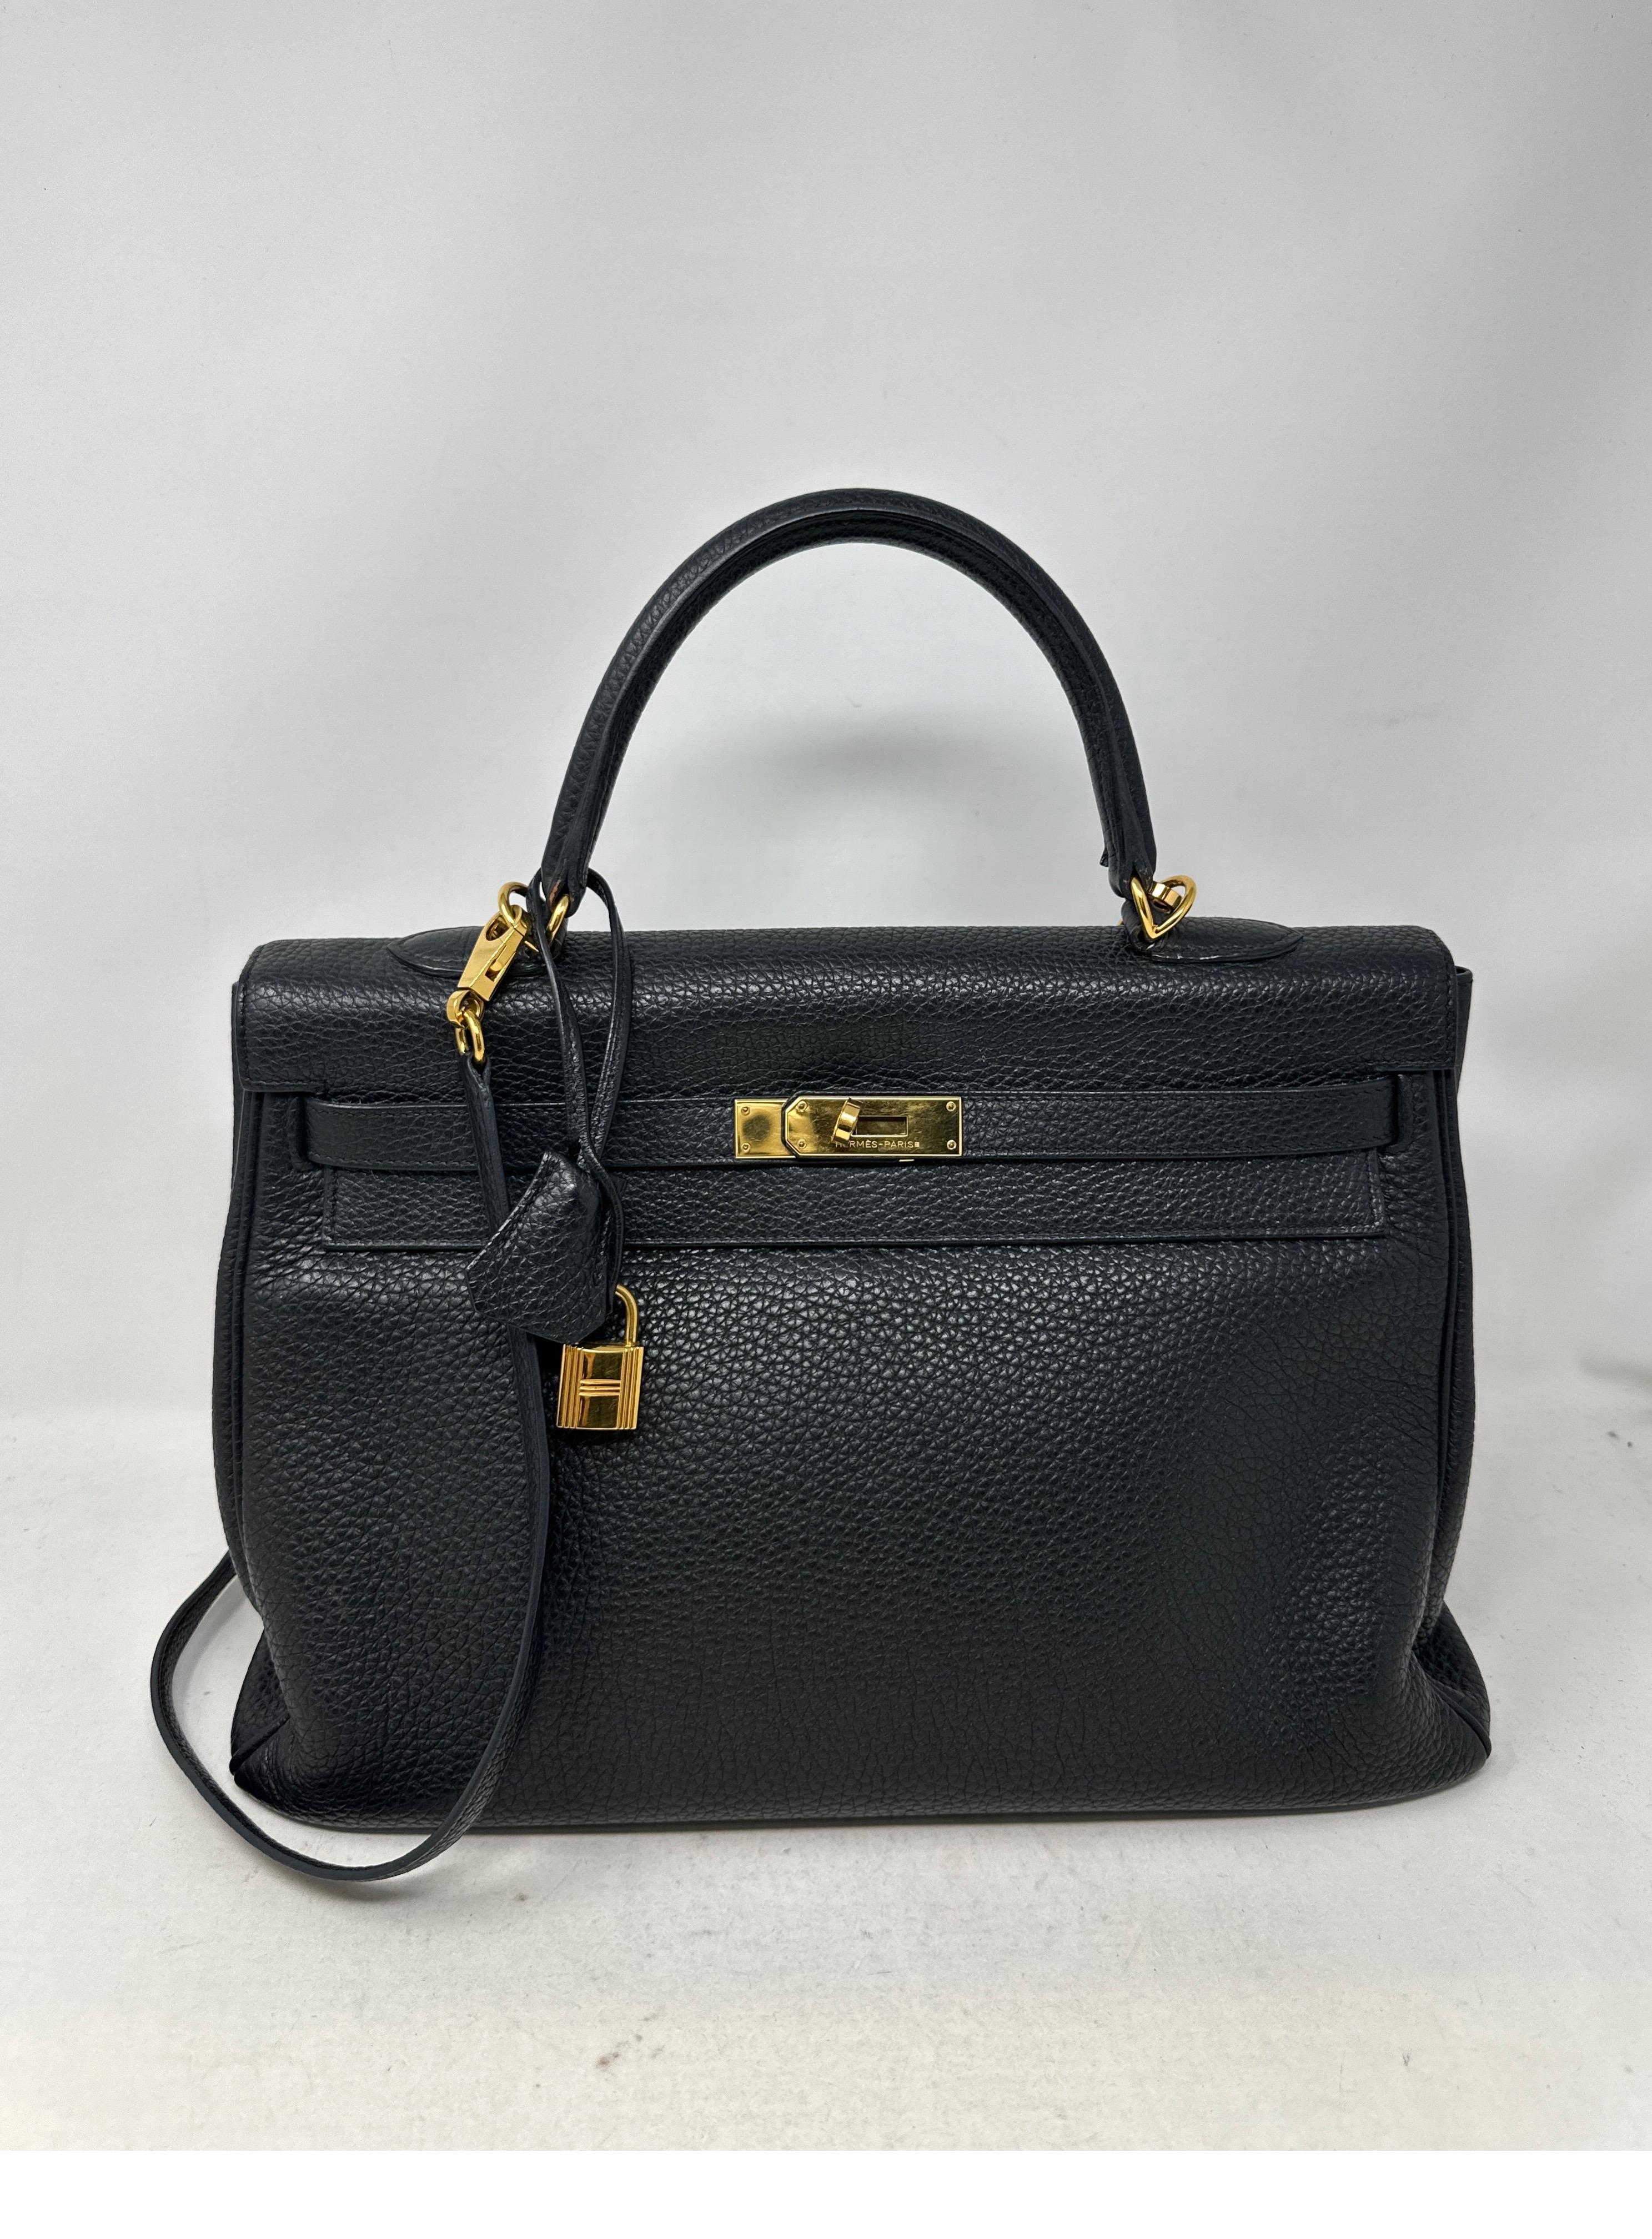 Hermes Black Kelly 35 Bag. Good condition. Togo leather black with gold hardware. Classic bag for all collectors. Kelly has the detachable strap. Has light wear on corners. Please see all photos. Great classic size and color combo. Includes